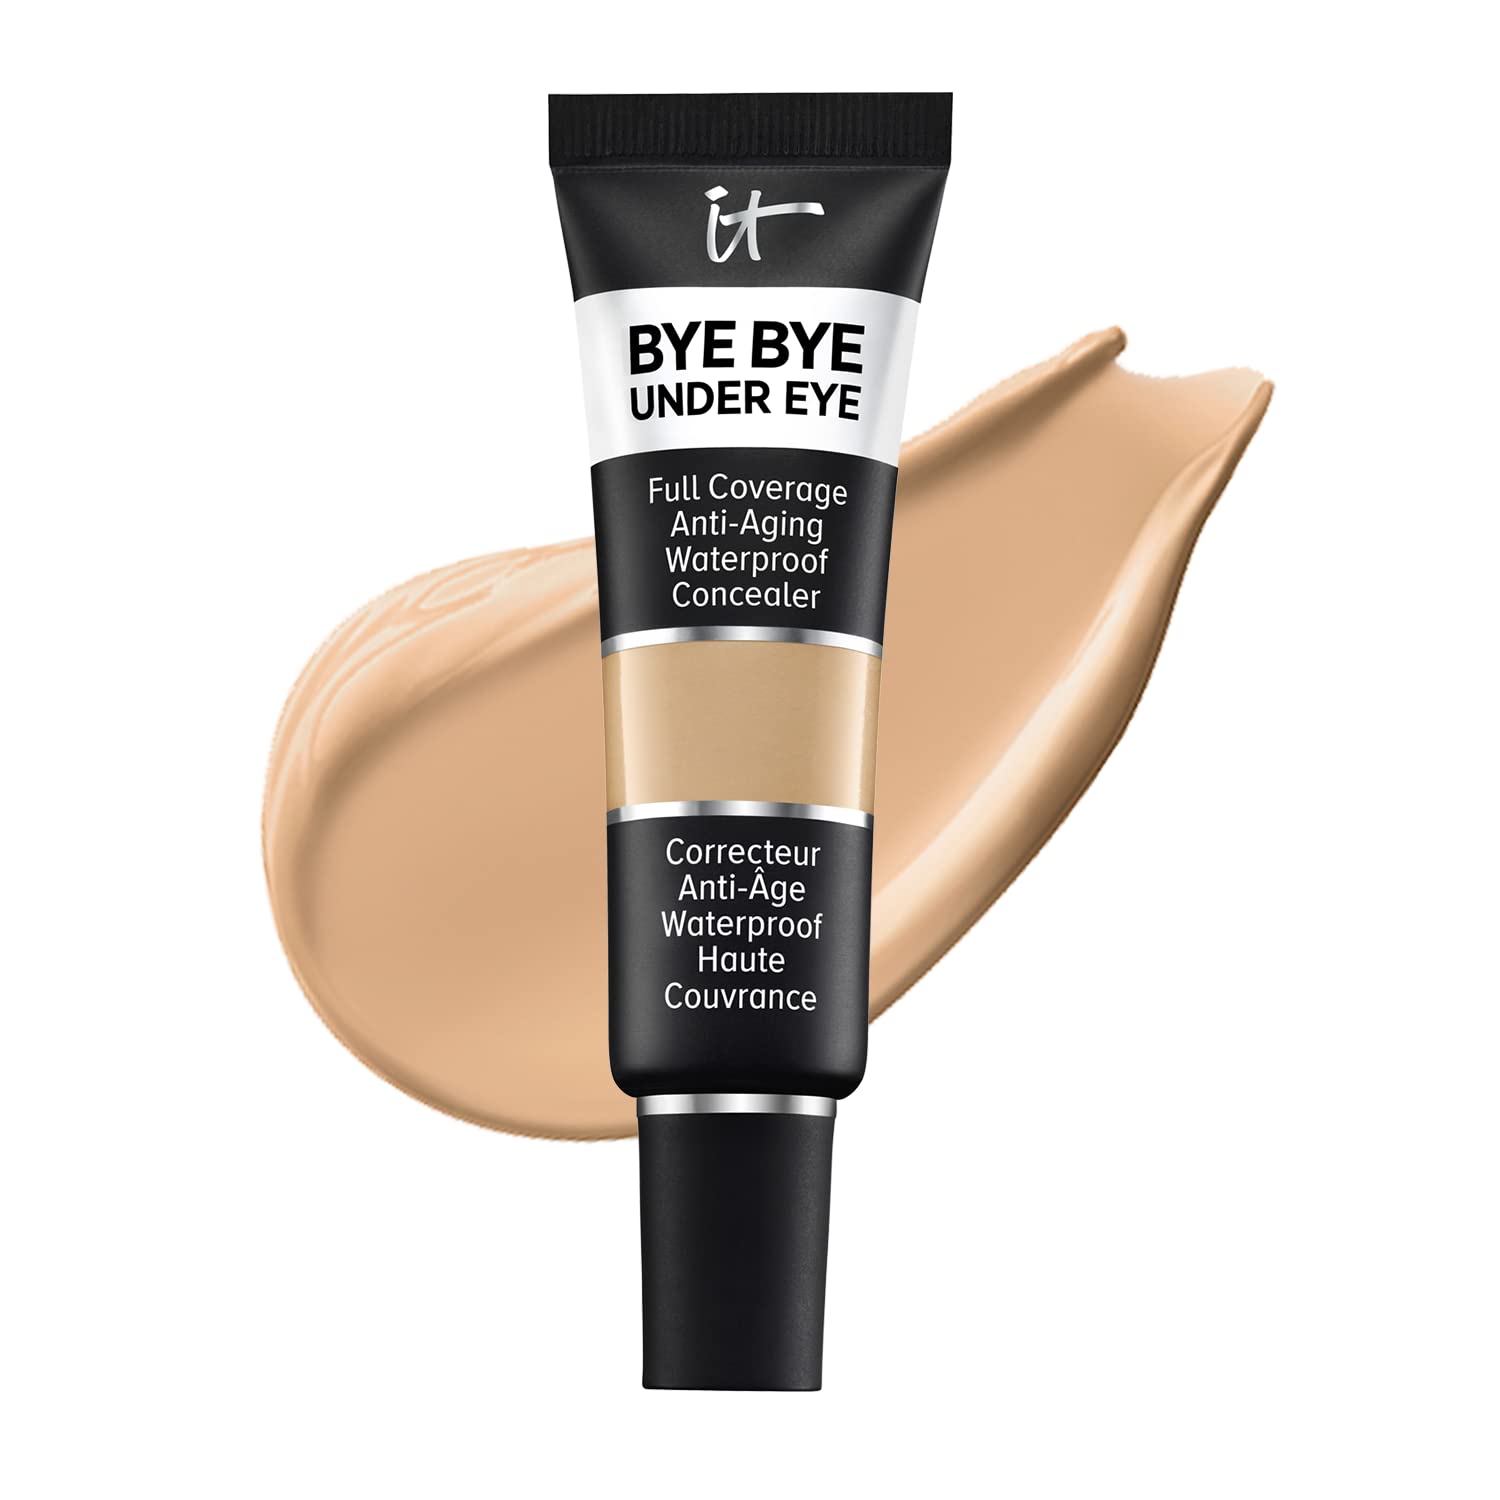 IT Cosmetics Bye Bye Under Eye Full Coverage Waterproof Concealer - for Dark Circles, Fine Lines, Redness & Discoloration - Anti-Aging - Natural Finish, 0.4 fl oz